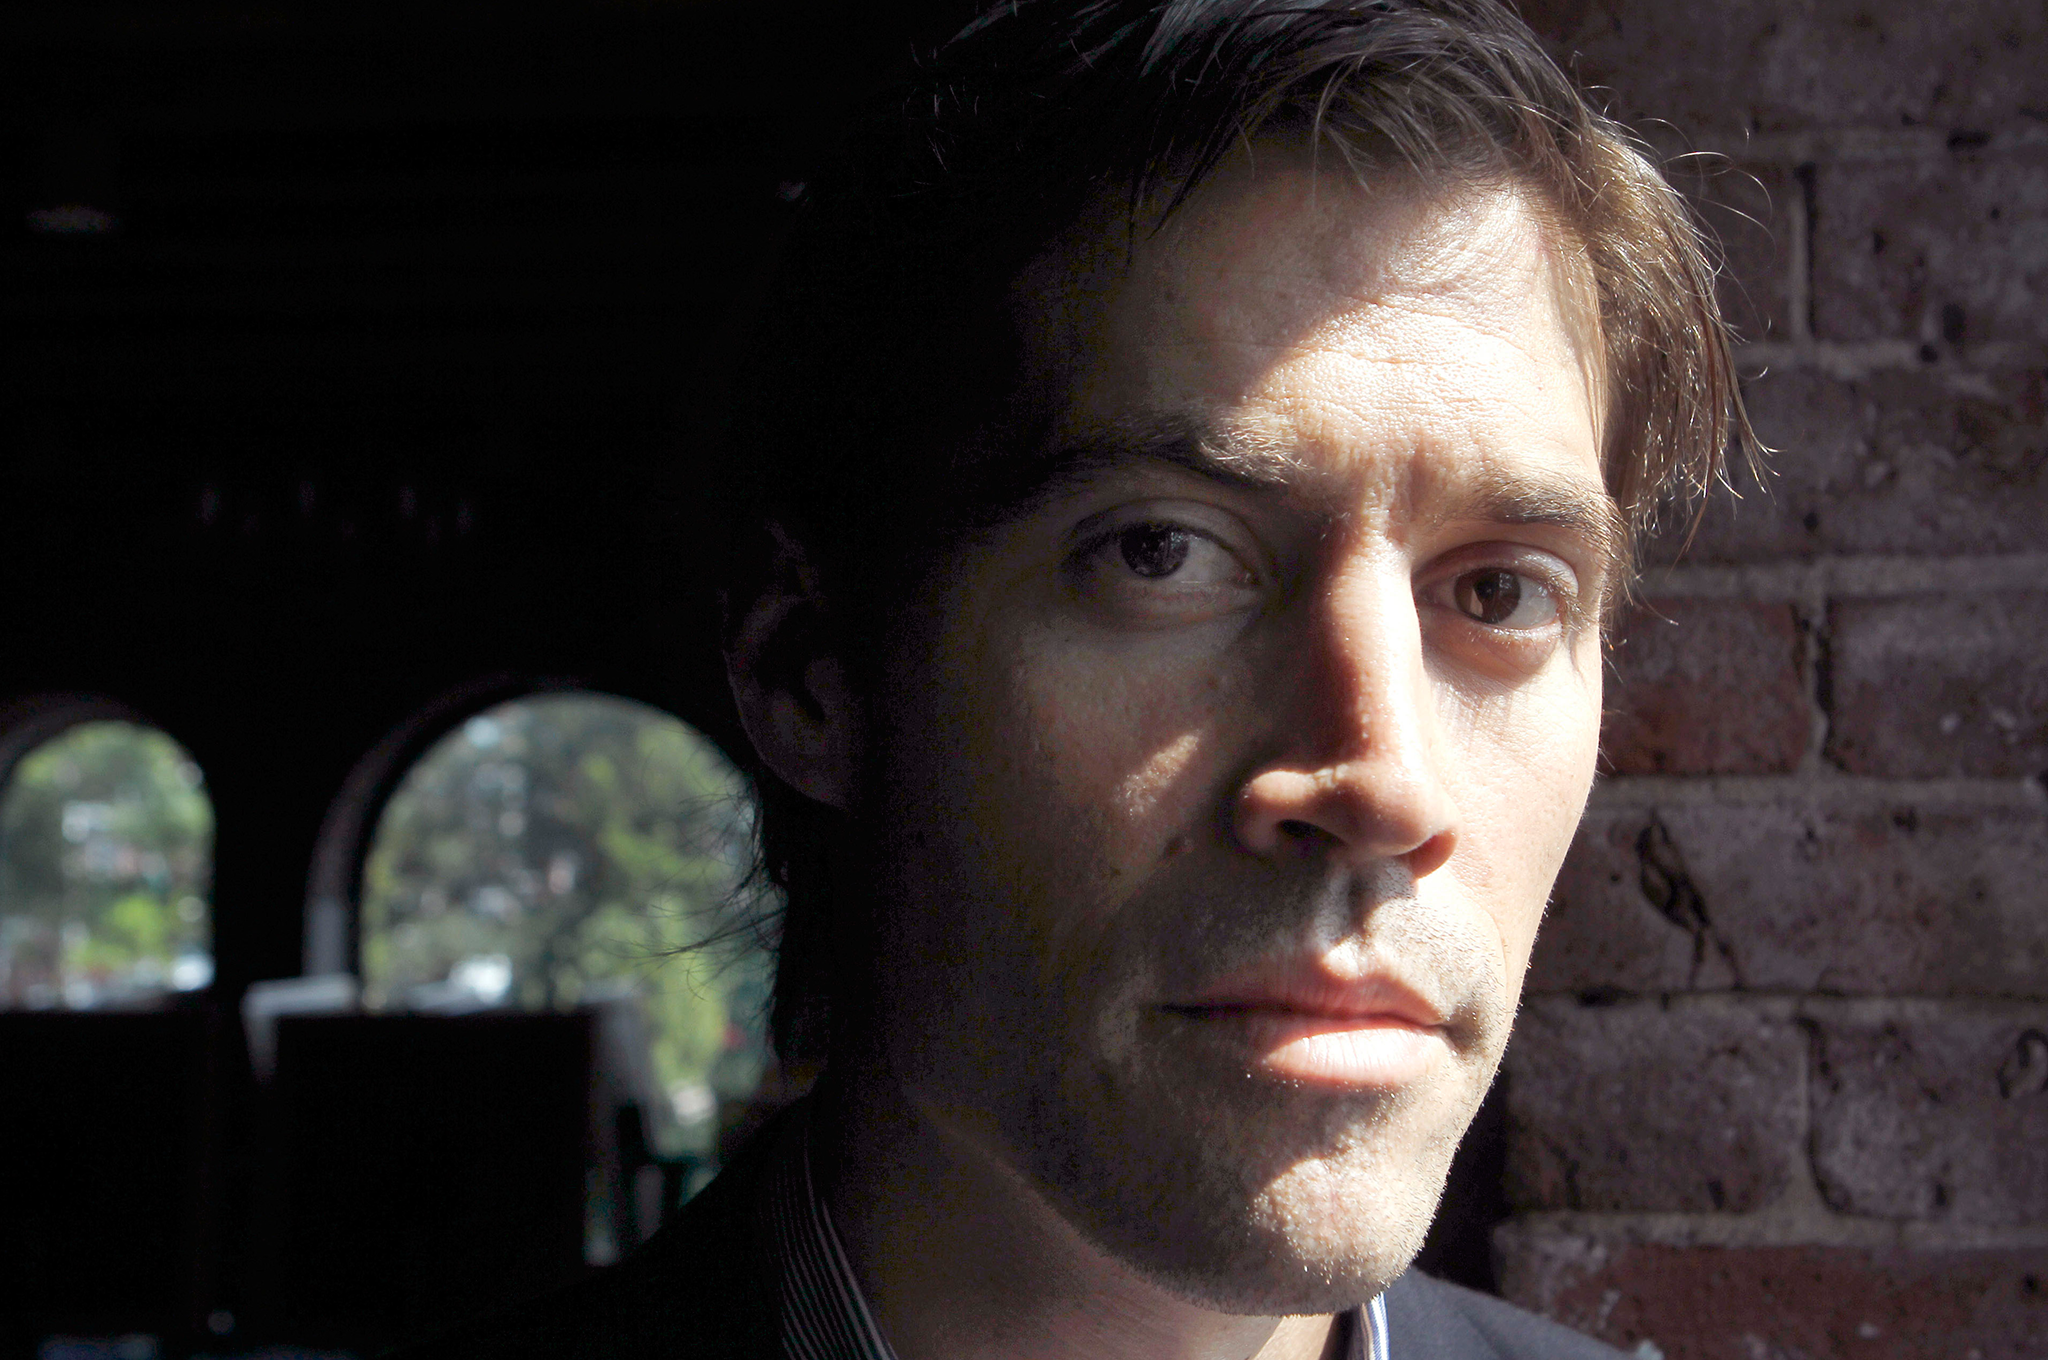 James Foley was captured in Syria in 2012